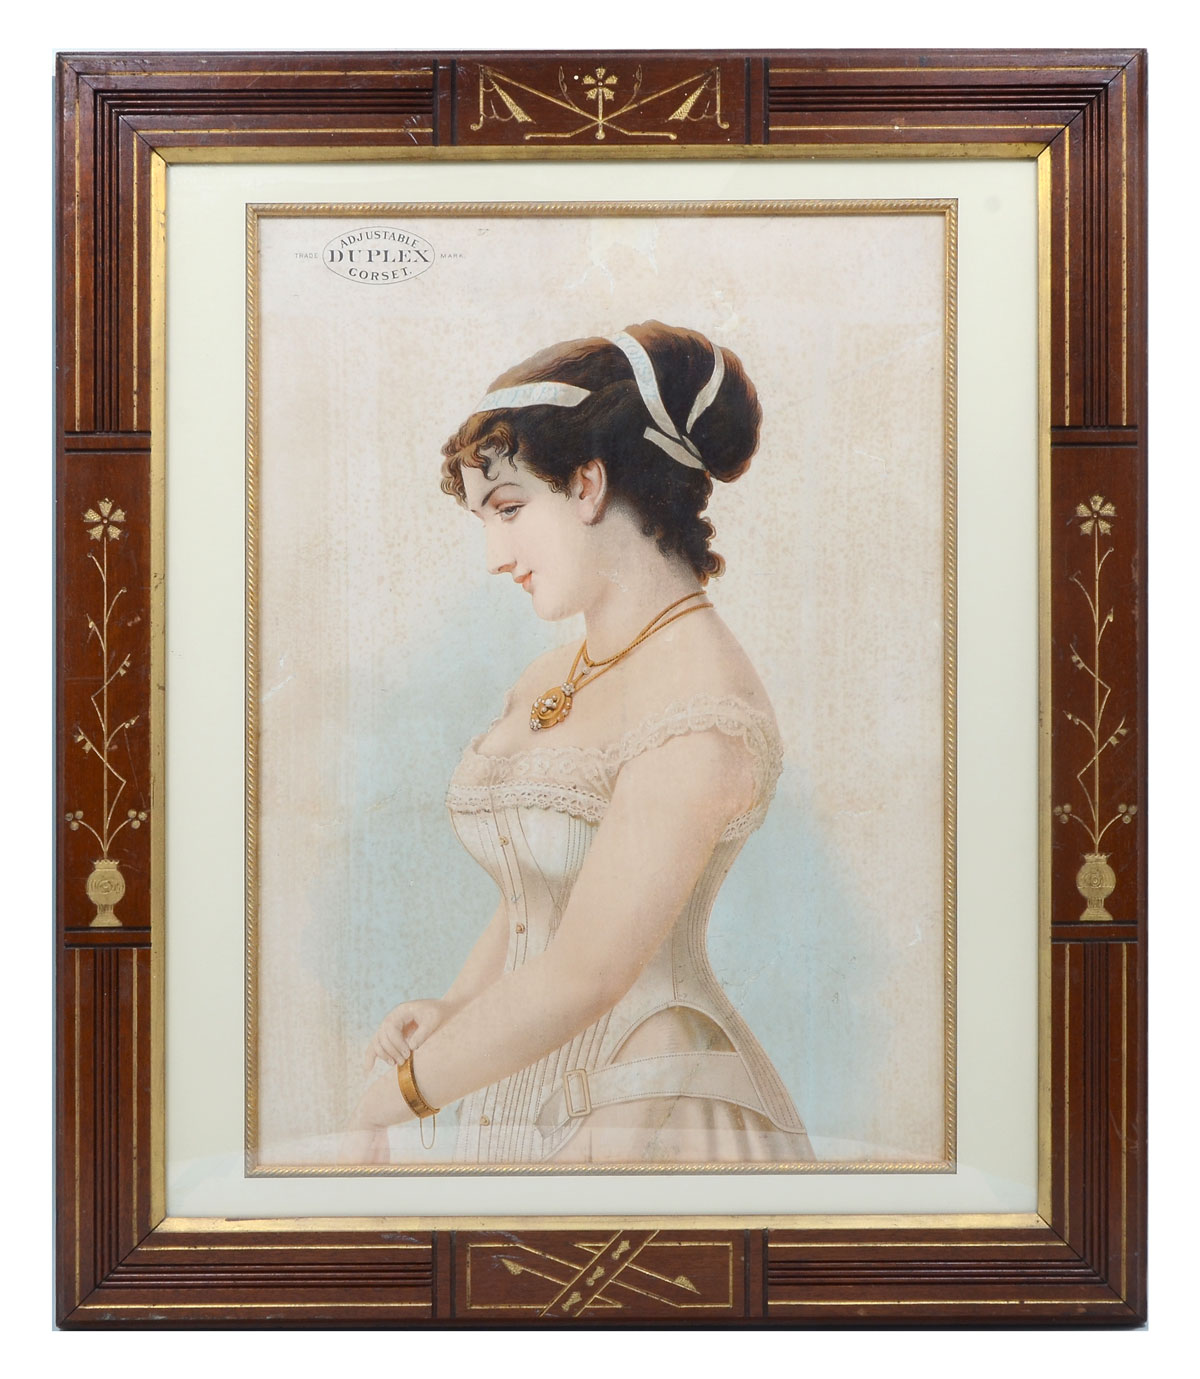 ADVERTISING LITHOGRAPH FOR ADJUSTABLE 36f29a